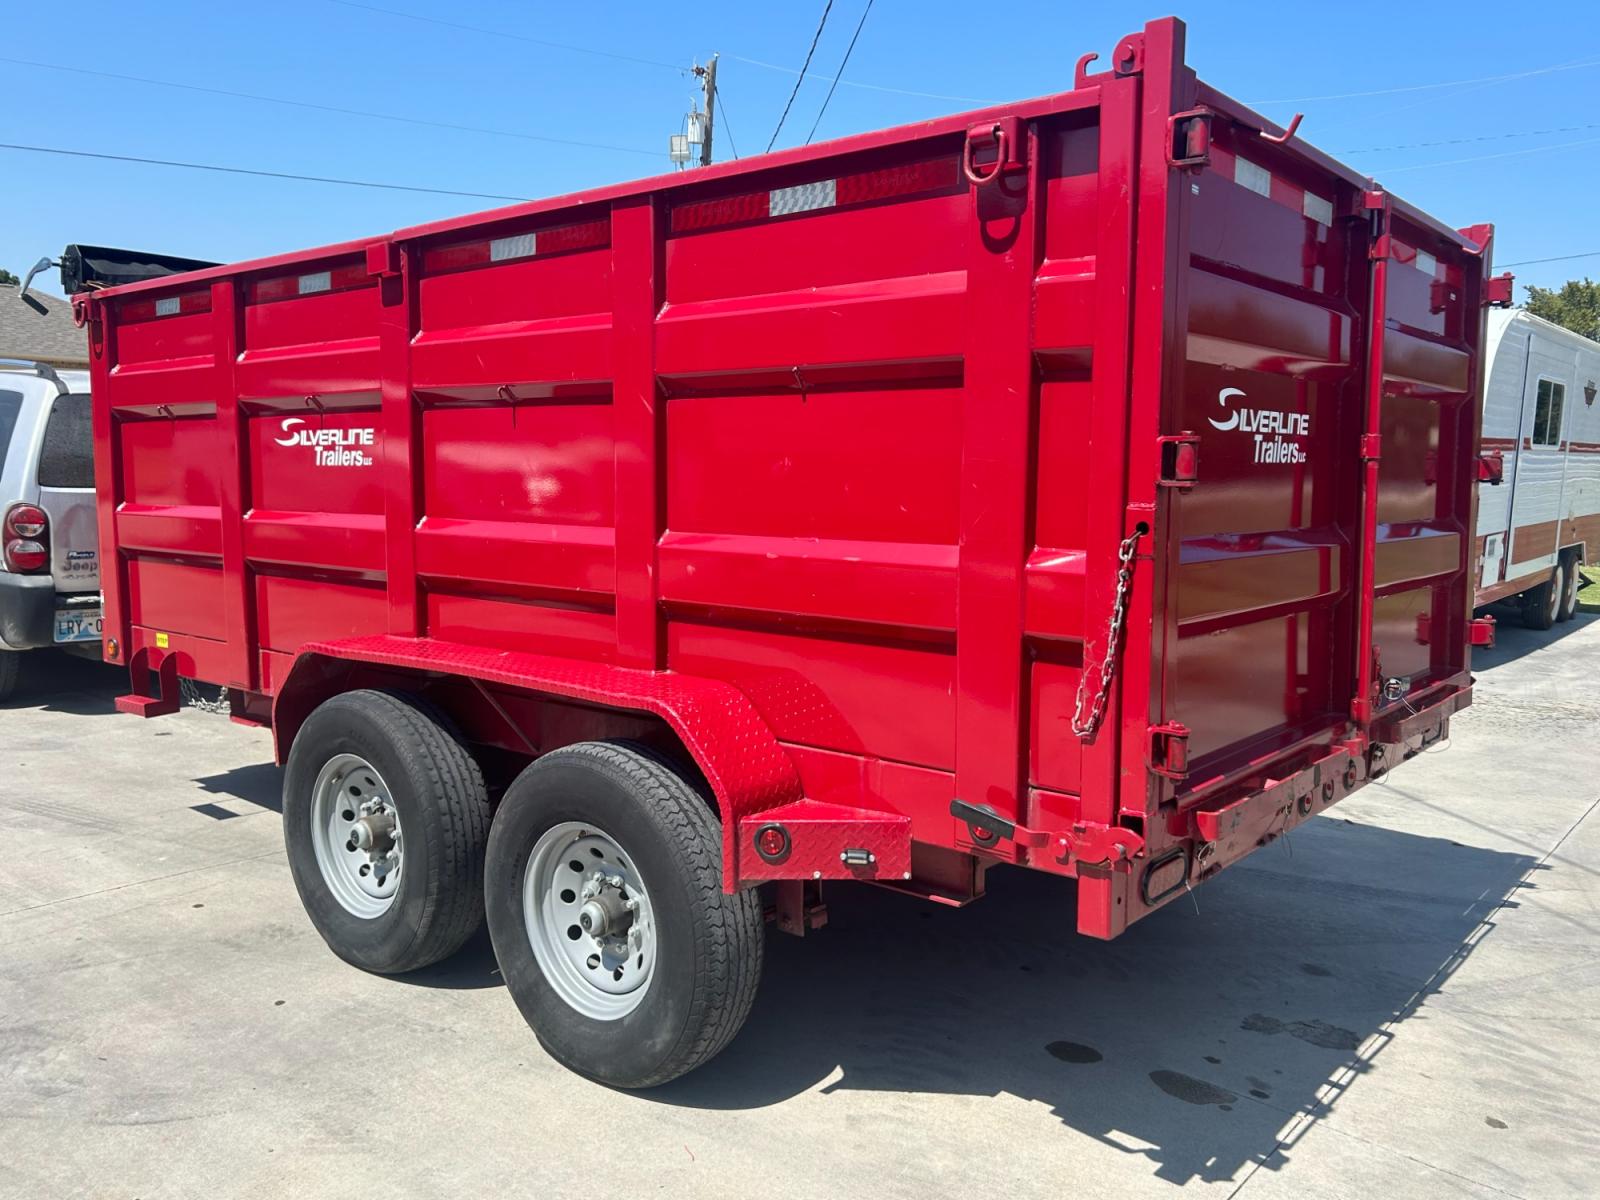 2022 RED EAST TEXAS TRAILER DUMPBED (58SBD1420NE) , located at 17760 Hwy 62, Morris, OK, 74445, 35.609104, -95.877060 - 2022 SILVERLINE TRAILER 83X14 FEATURES 2 7,000 LB DEXTER SPRING AXLES, 2 ELEC FSA BRAKES, COUPLER 2-5/16" ADJUSTABLE (6 HOLE), DIAMOND PLATE FENDERS, 16" CROSS-MEMBERS, 48" DUMP SIDES, 48" 3 WAY GATE, MESH ROLL TARP SYSTEM, JACK SPRING LOADED DROP LEG, 4 3'' D-RINGS, TOOL BOX IN TONGUE, SCISSOR HOIS - Photo #5